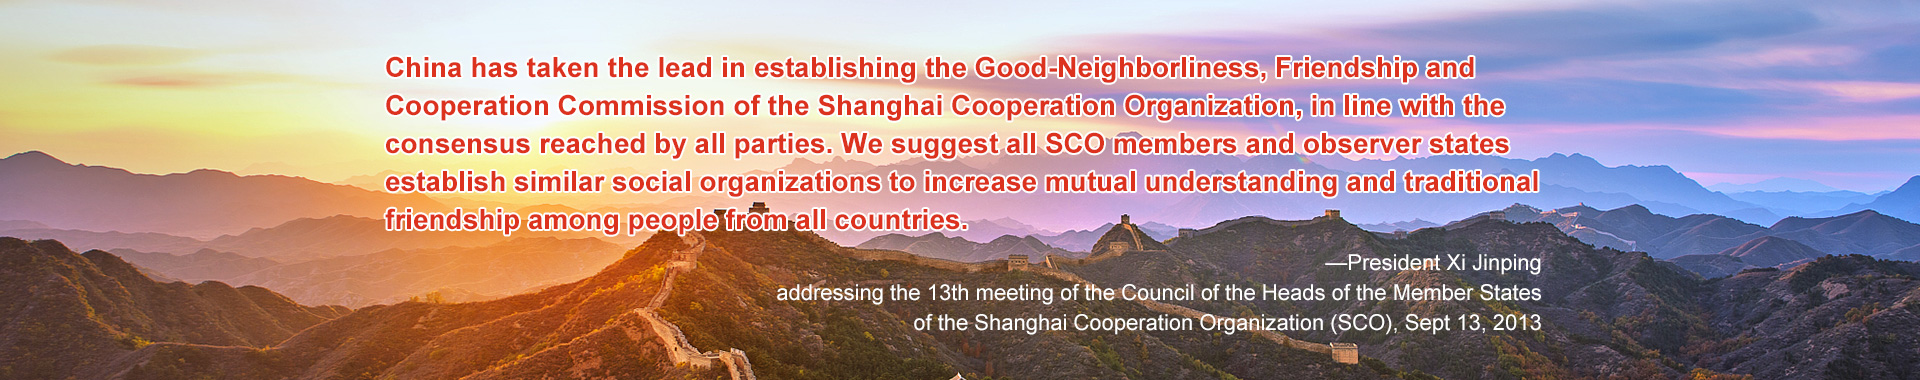 President Xi Jinping addressing the 13th meeting of the Council of the Heads of the Member States of the Shanghai Cooperation Organization (SCO)